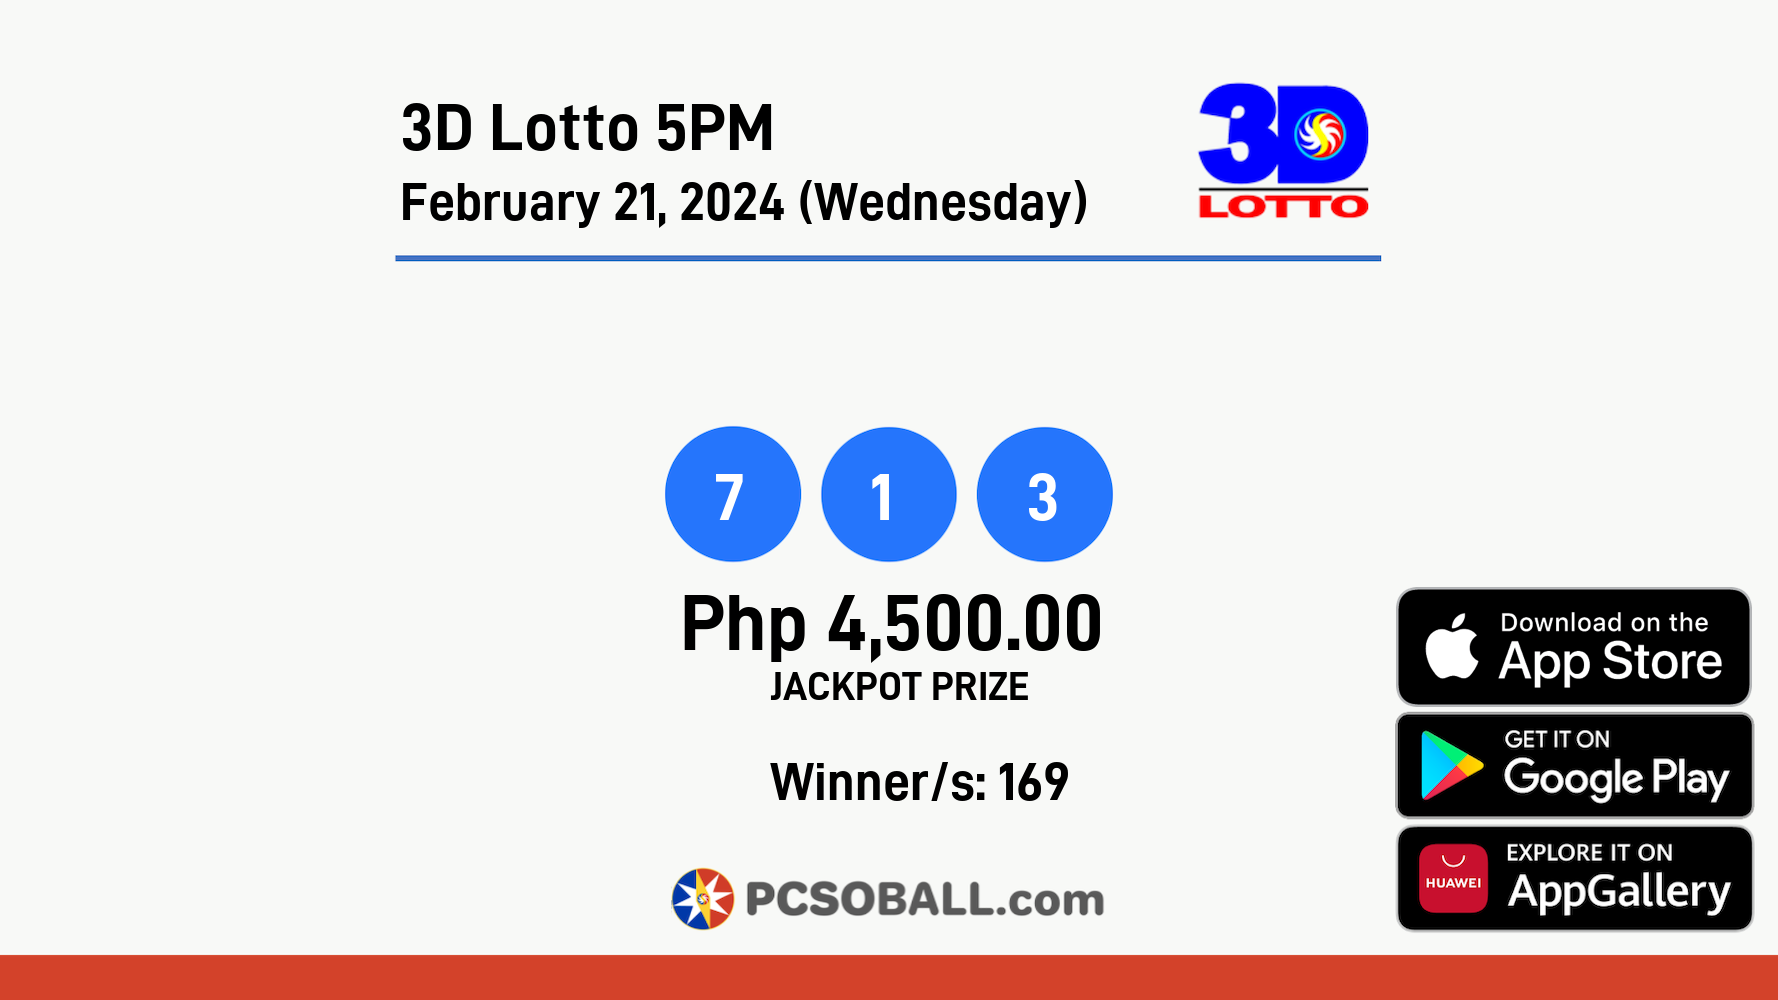 3D Lotto 5PM February 21, 2024 (Wednesday) Result